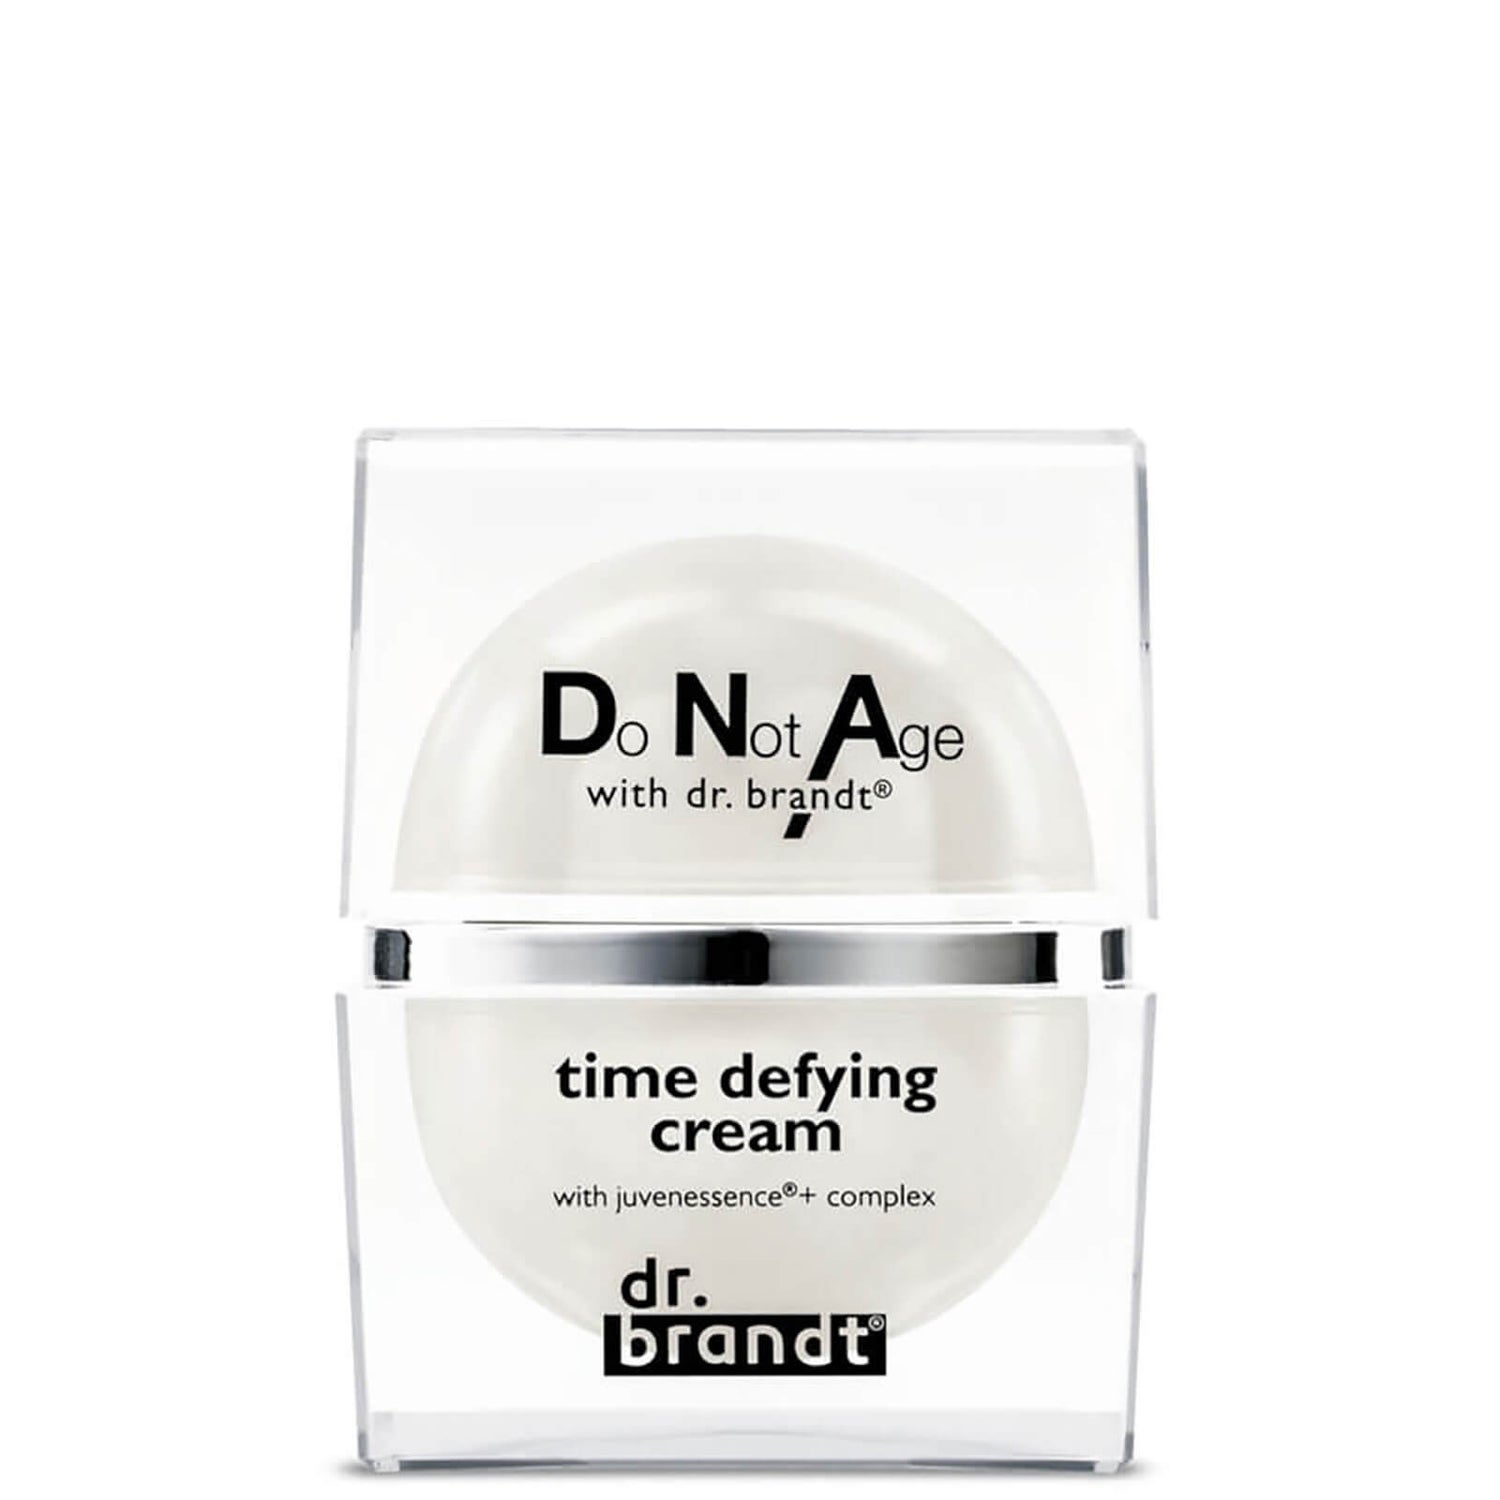 Dr. Brandt Do Not Age Time Defying Cream (1.7 oz.)